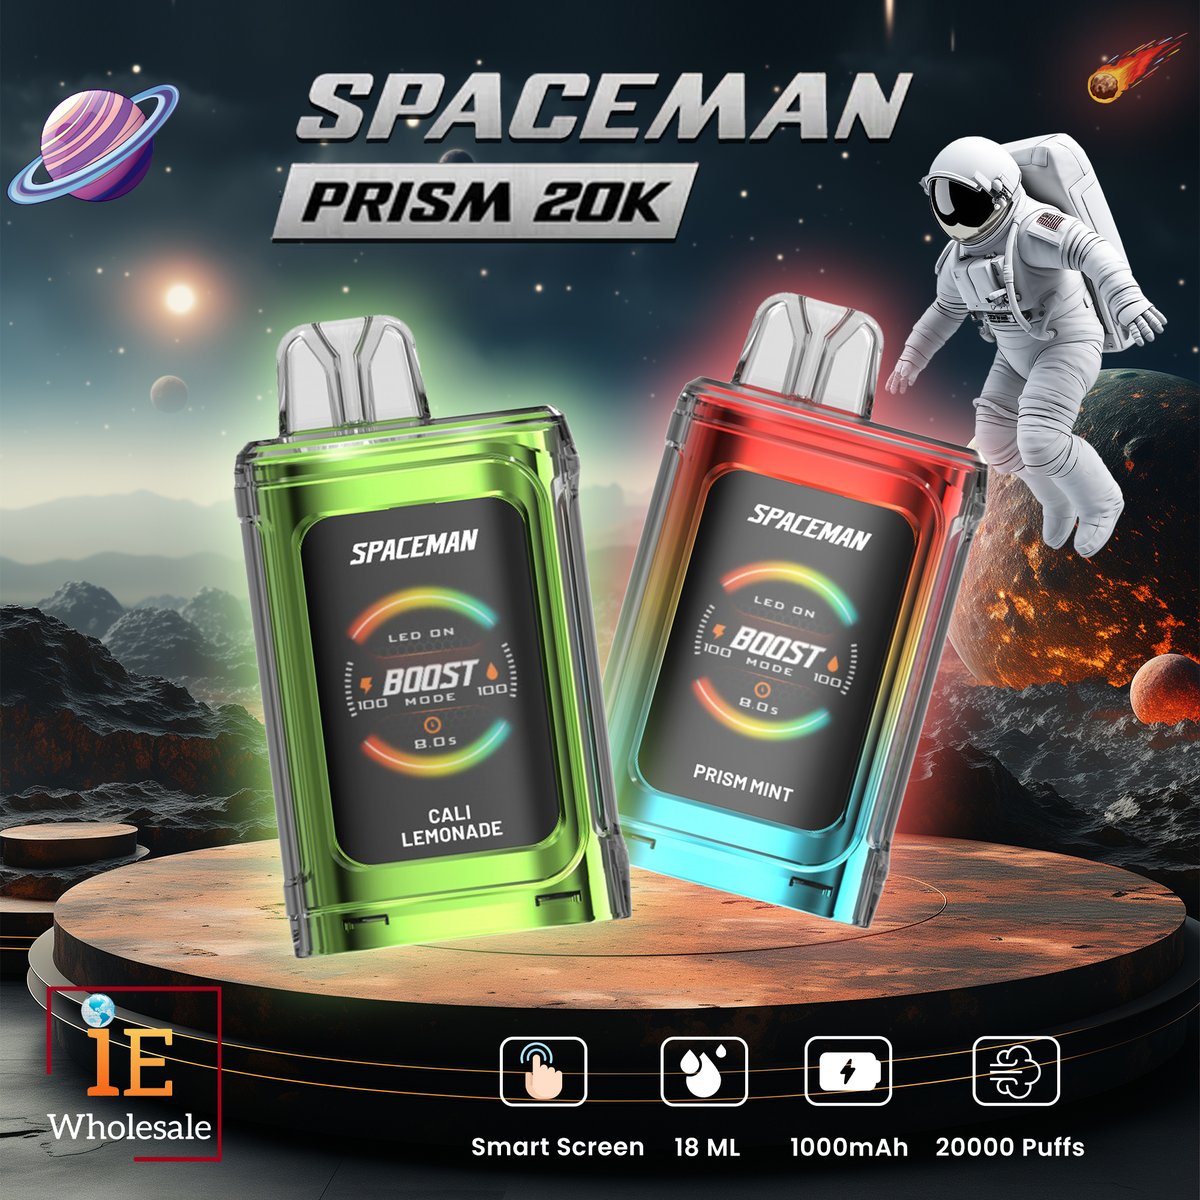 🚀✨ Embark on Flavorful Adventures with Spaceman PRISM 20000 Puffs 5pk! ✨🌌
🌠✨ Elevate your vaping game with Spaceman PRISM 20000 Puffs 5pk! 🚀🔥
Visit Us Our Product : -rb.gy/iefcw6
#spacemanprism #vapeflavors #cosmicjourney #vapingjourney #usa #ca